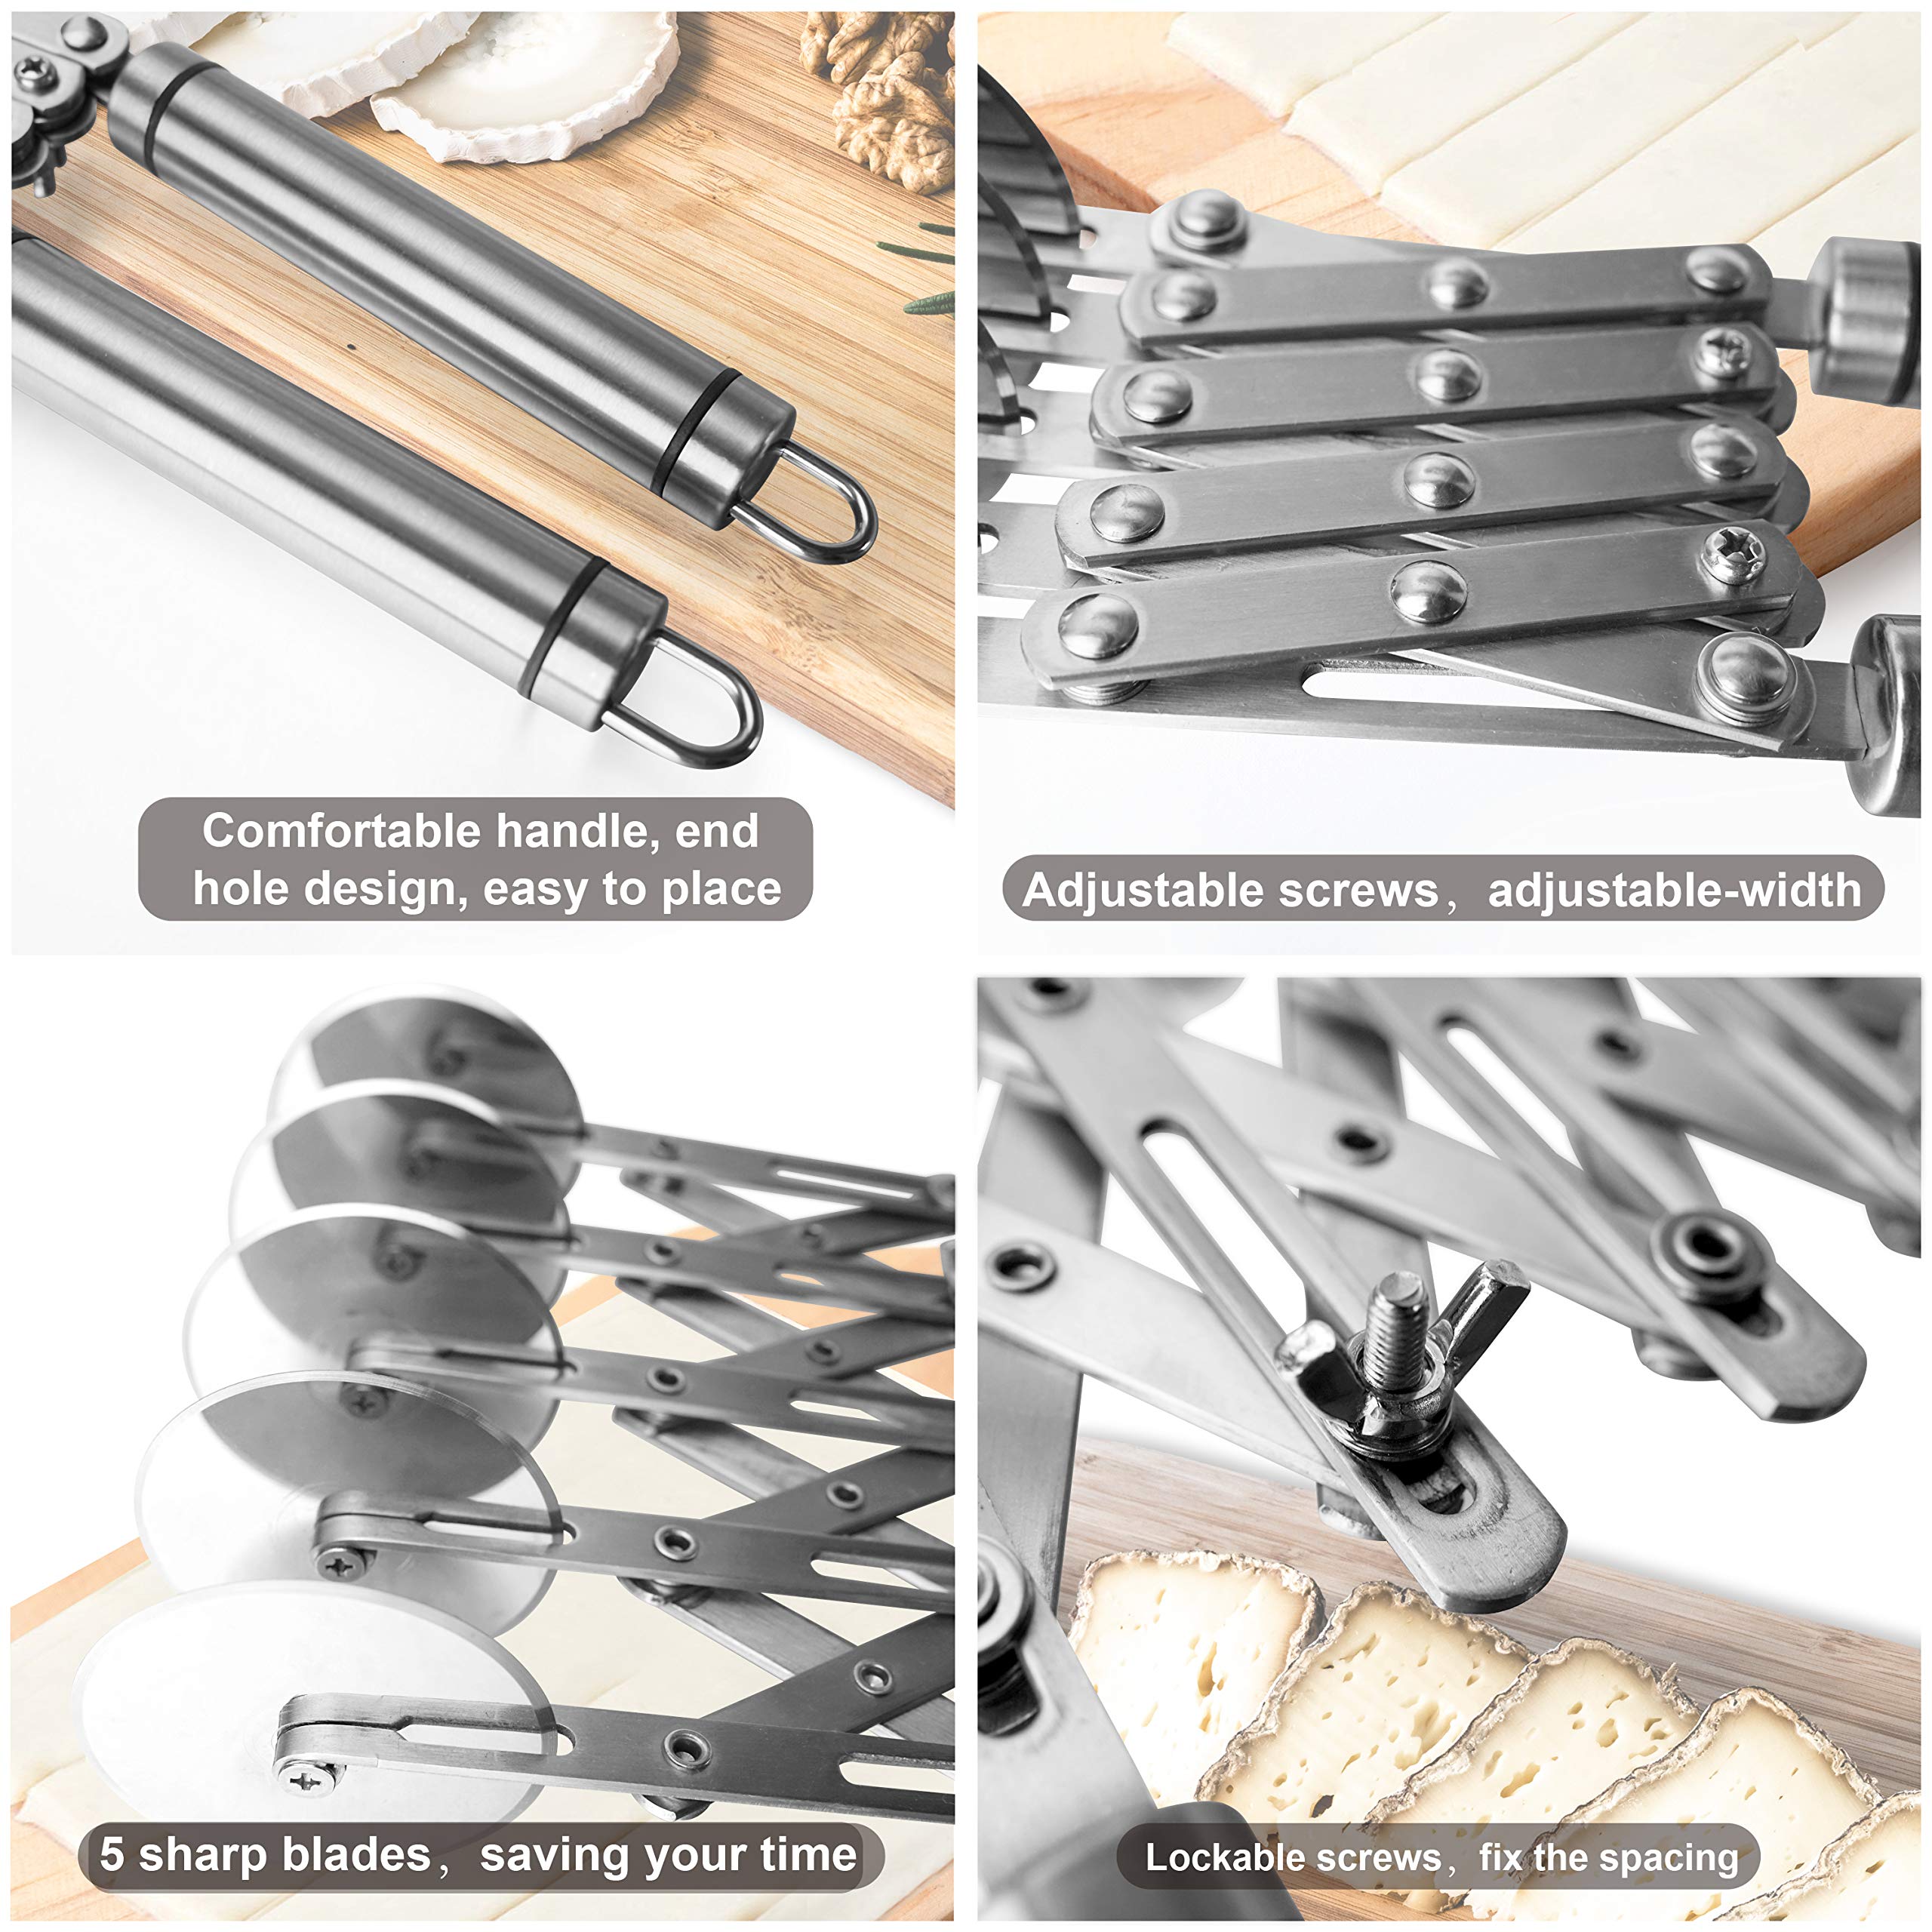 5 Wheel Pastry Cutter with Grinder Spaghetti Cutter Dough Roller Cutter Knife Stainless Steel Pizza Slicer Pasta Wheeling Cutter Attice Roller Adjustable Dough Divider with Handle